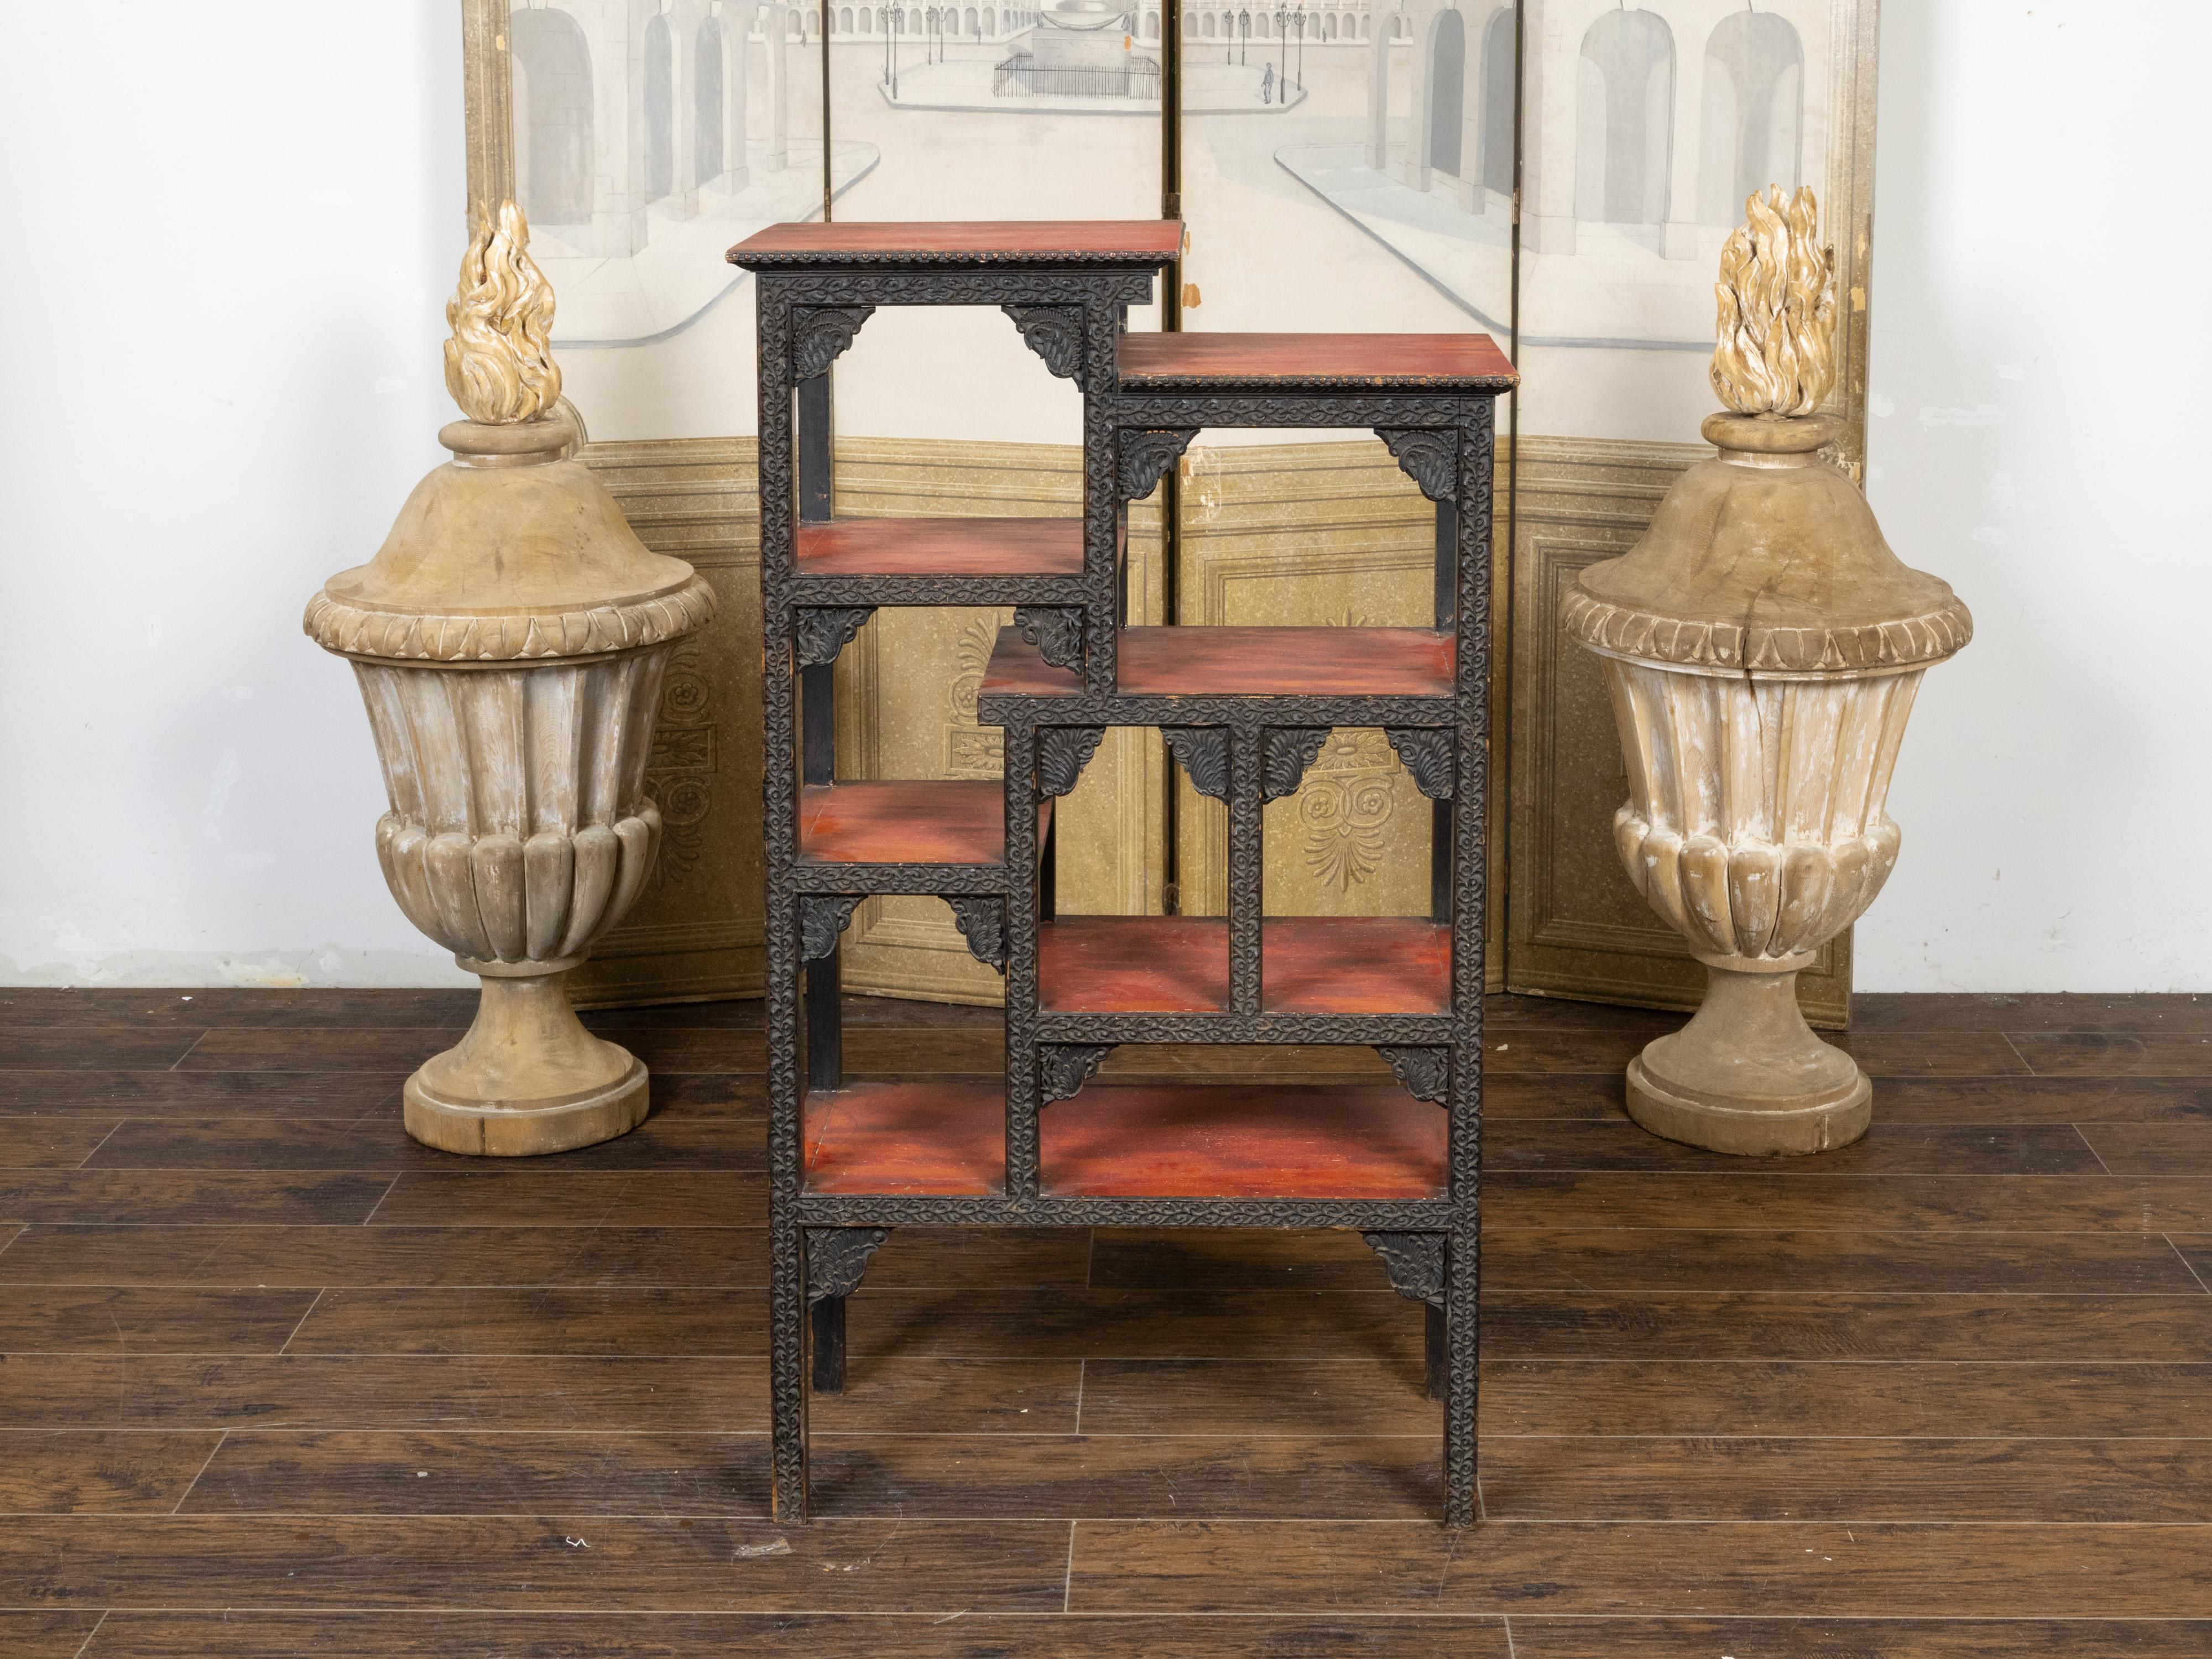 An Anglo-Indian tiered shelf from the early 20th century, with richly carved structure, scrolling foliage, reddish brown accents and black paint. Hand-crafted during the second quarter of the 20th century, this tiered pieces features seven shelves